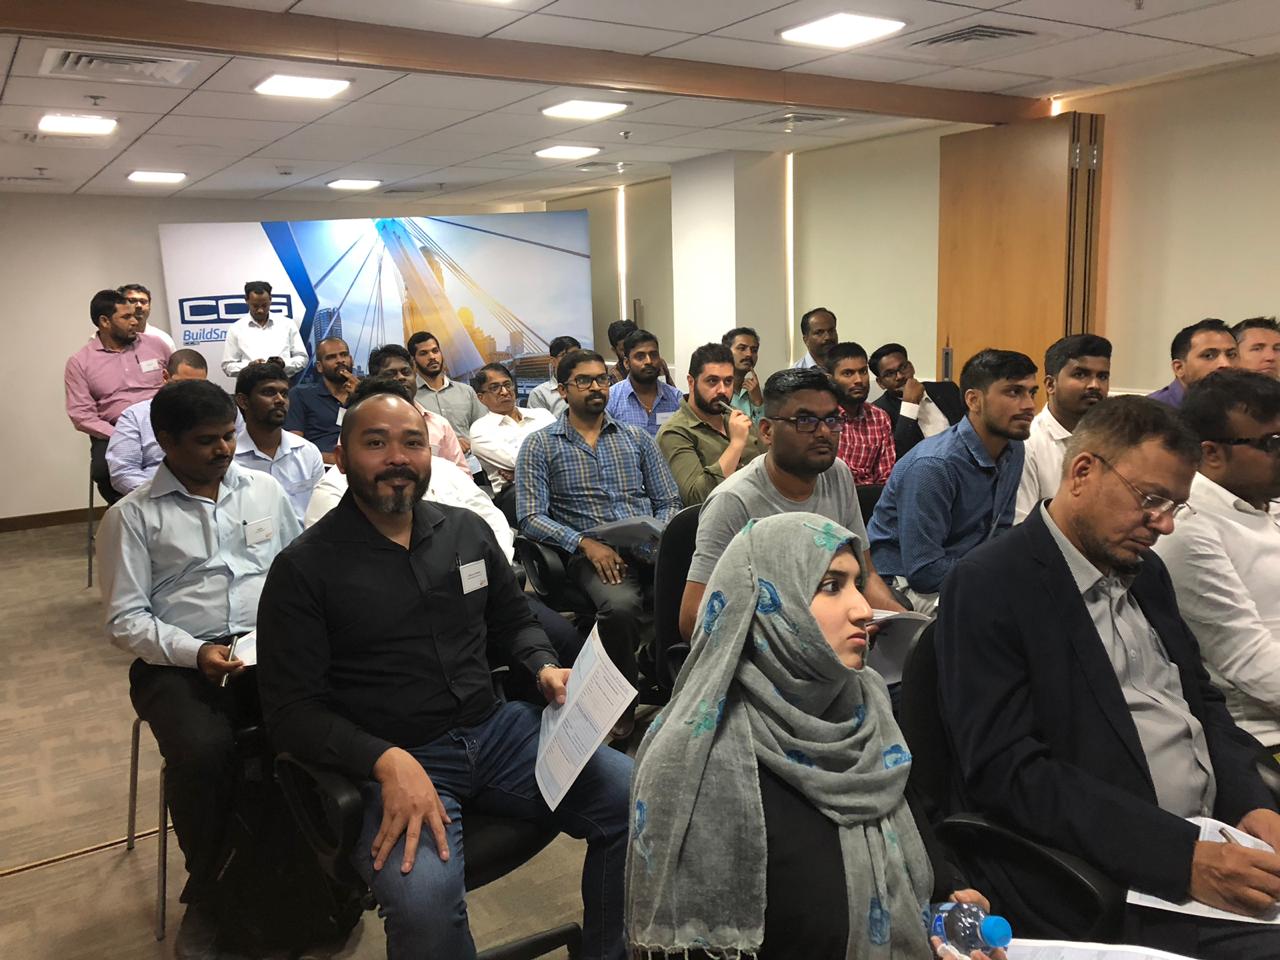 Attendees to the User event in Dubai